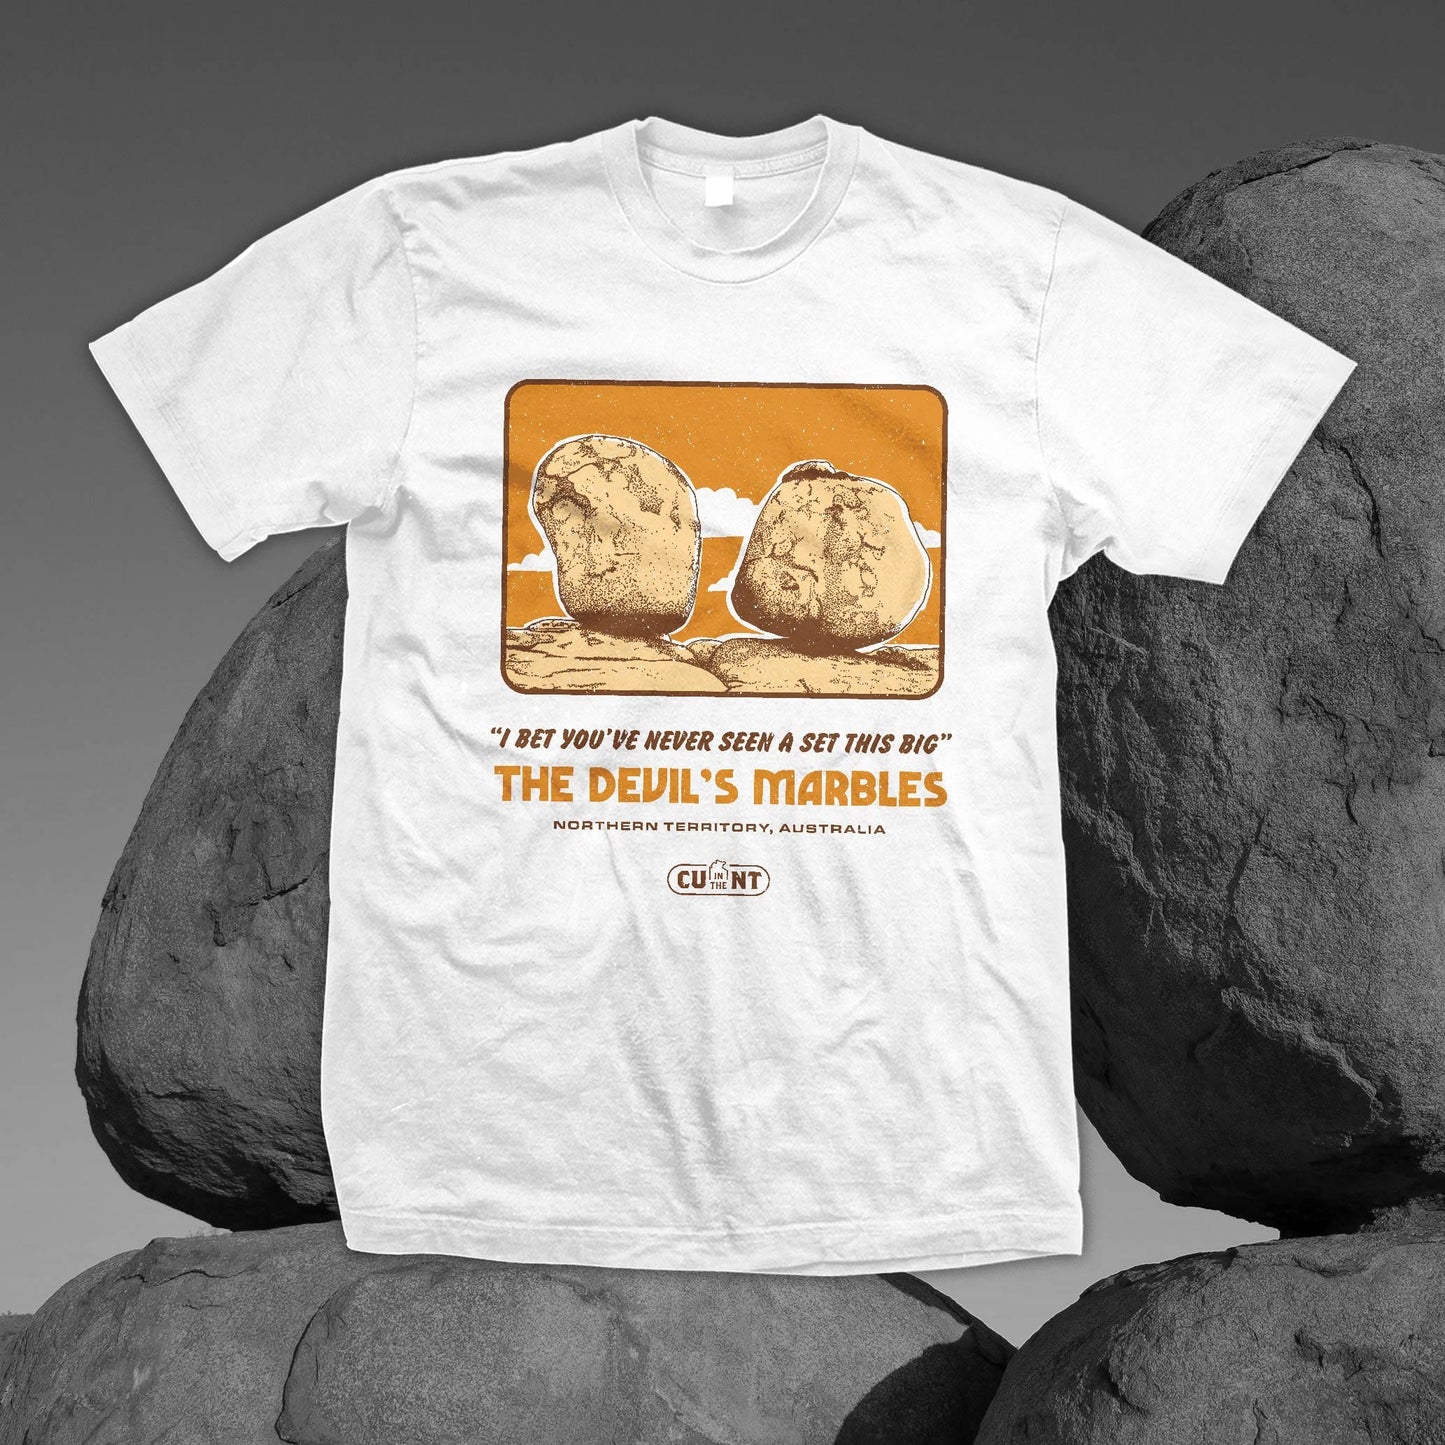 Destination Devils Marbles - White Tee Shirts NT Unofficial